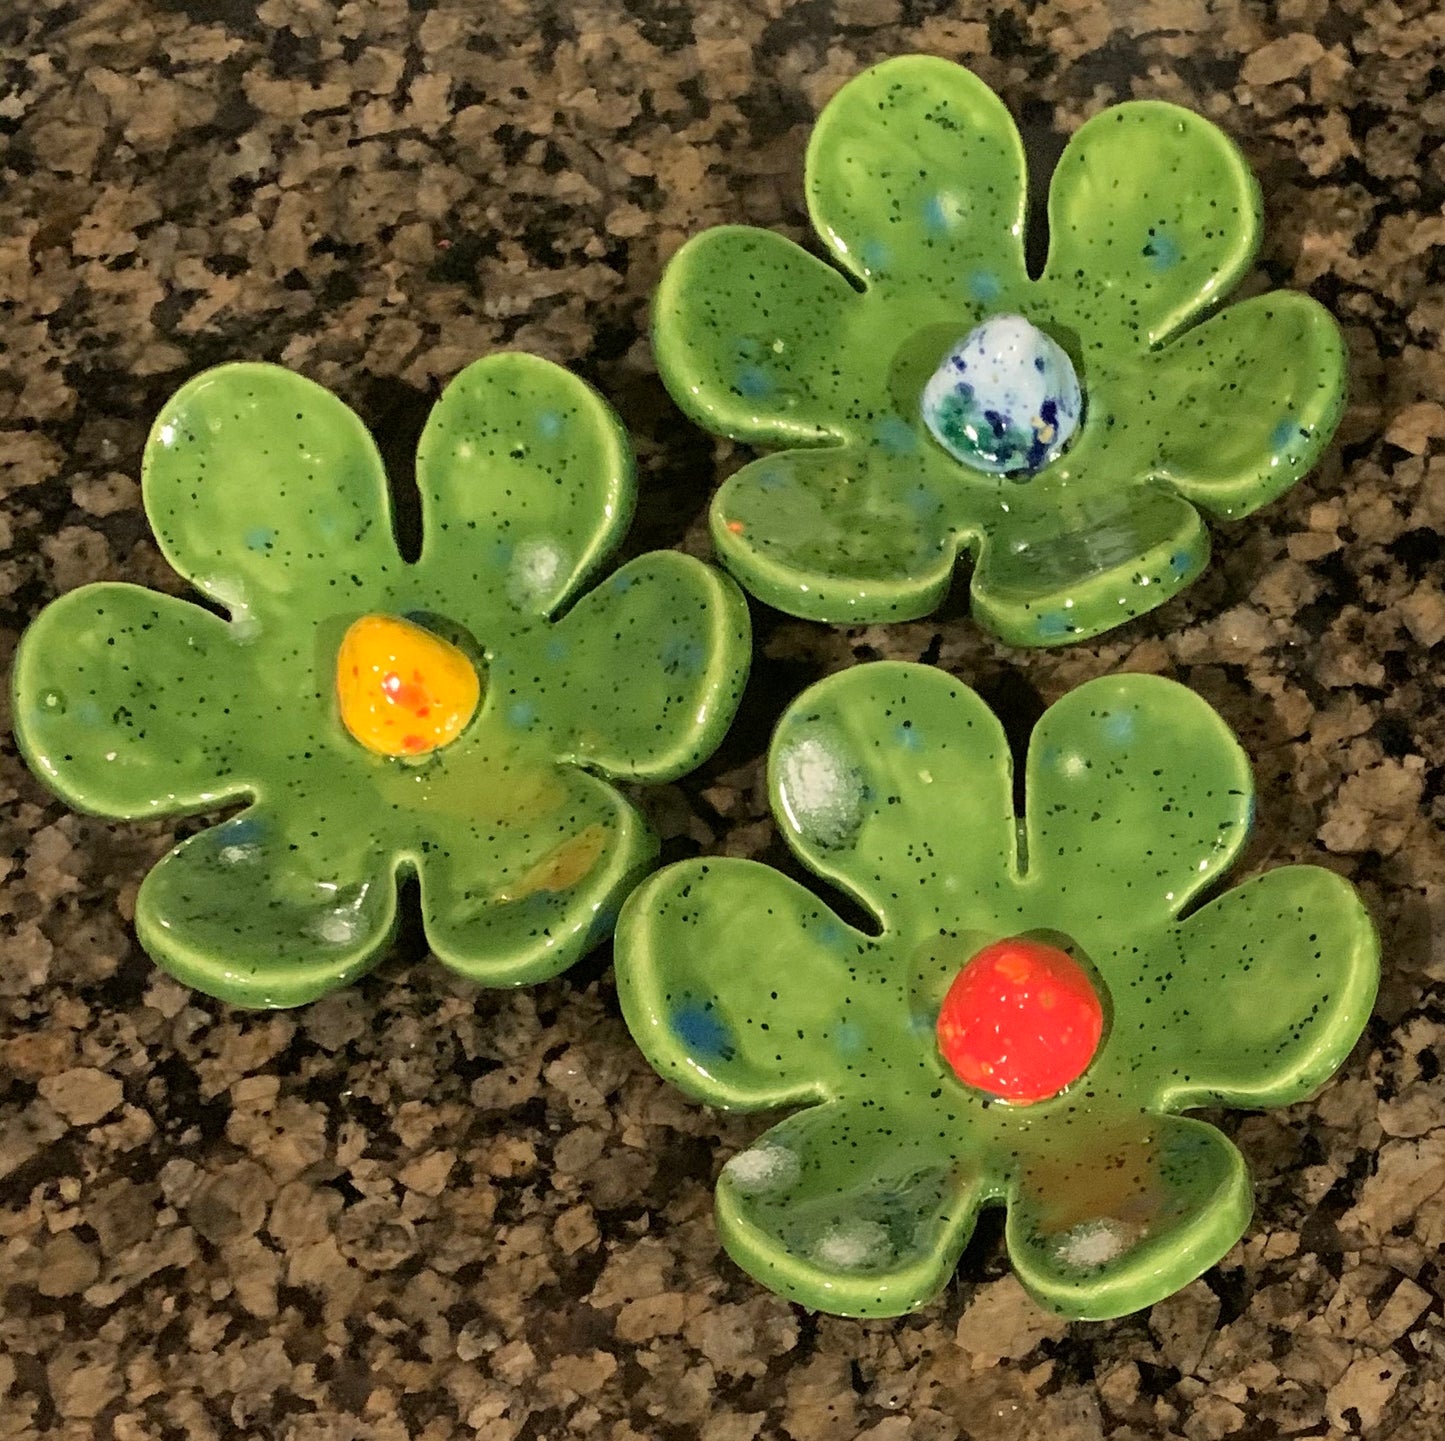 Flower Art Stake - Green with Blue center